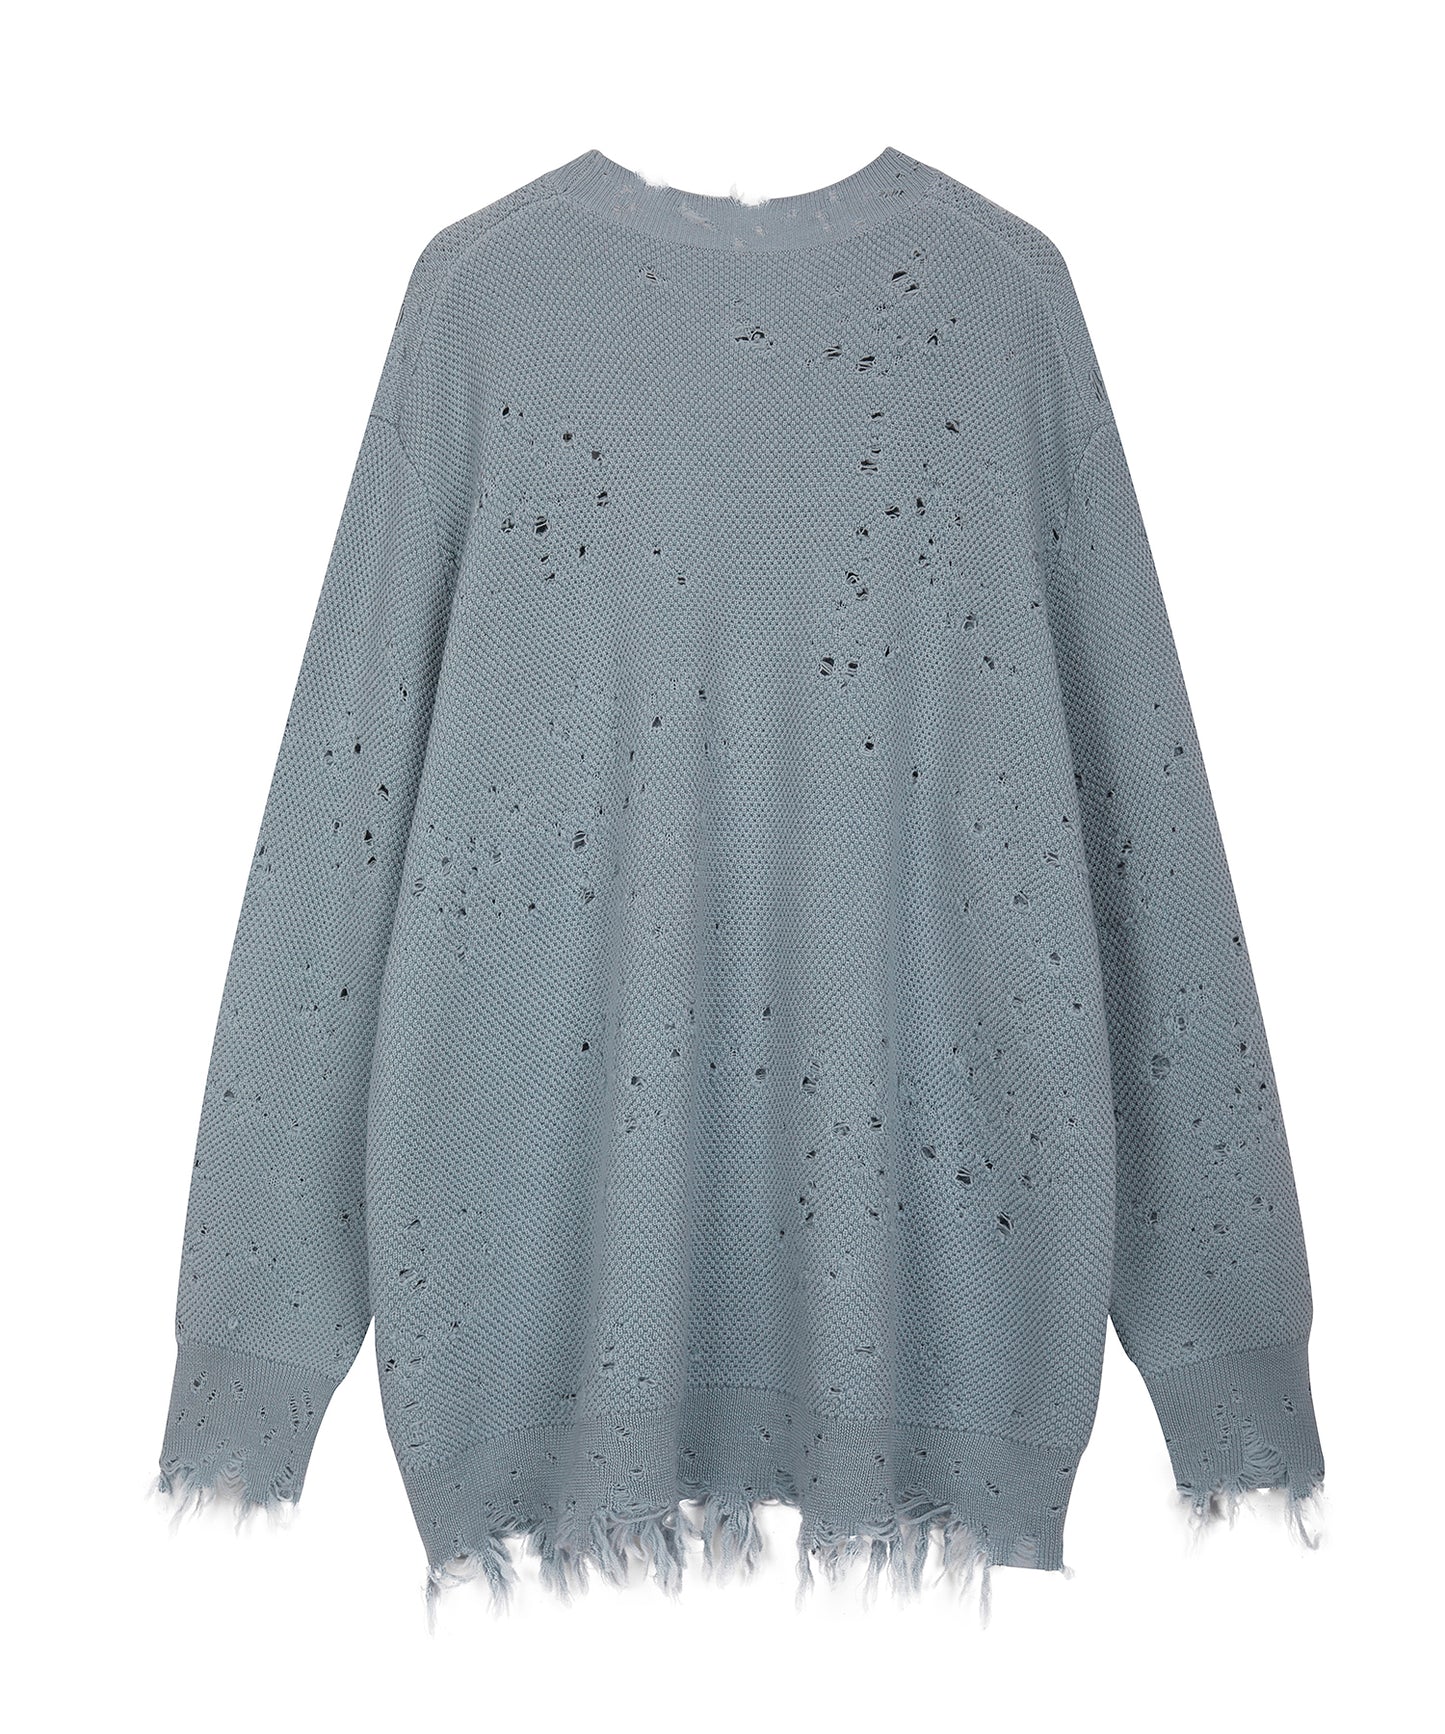 Distressed Fluffy Sweater